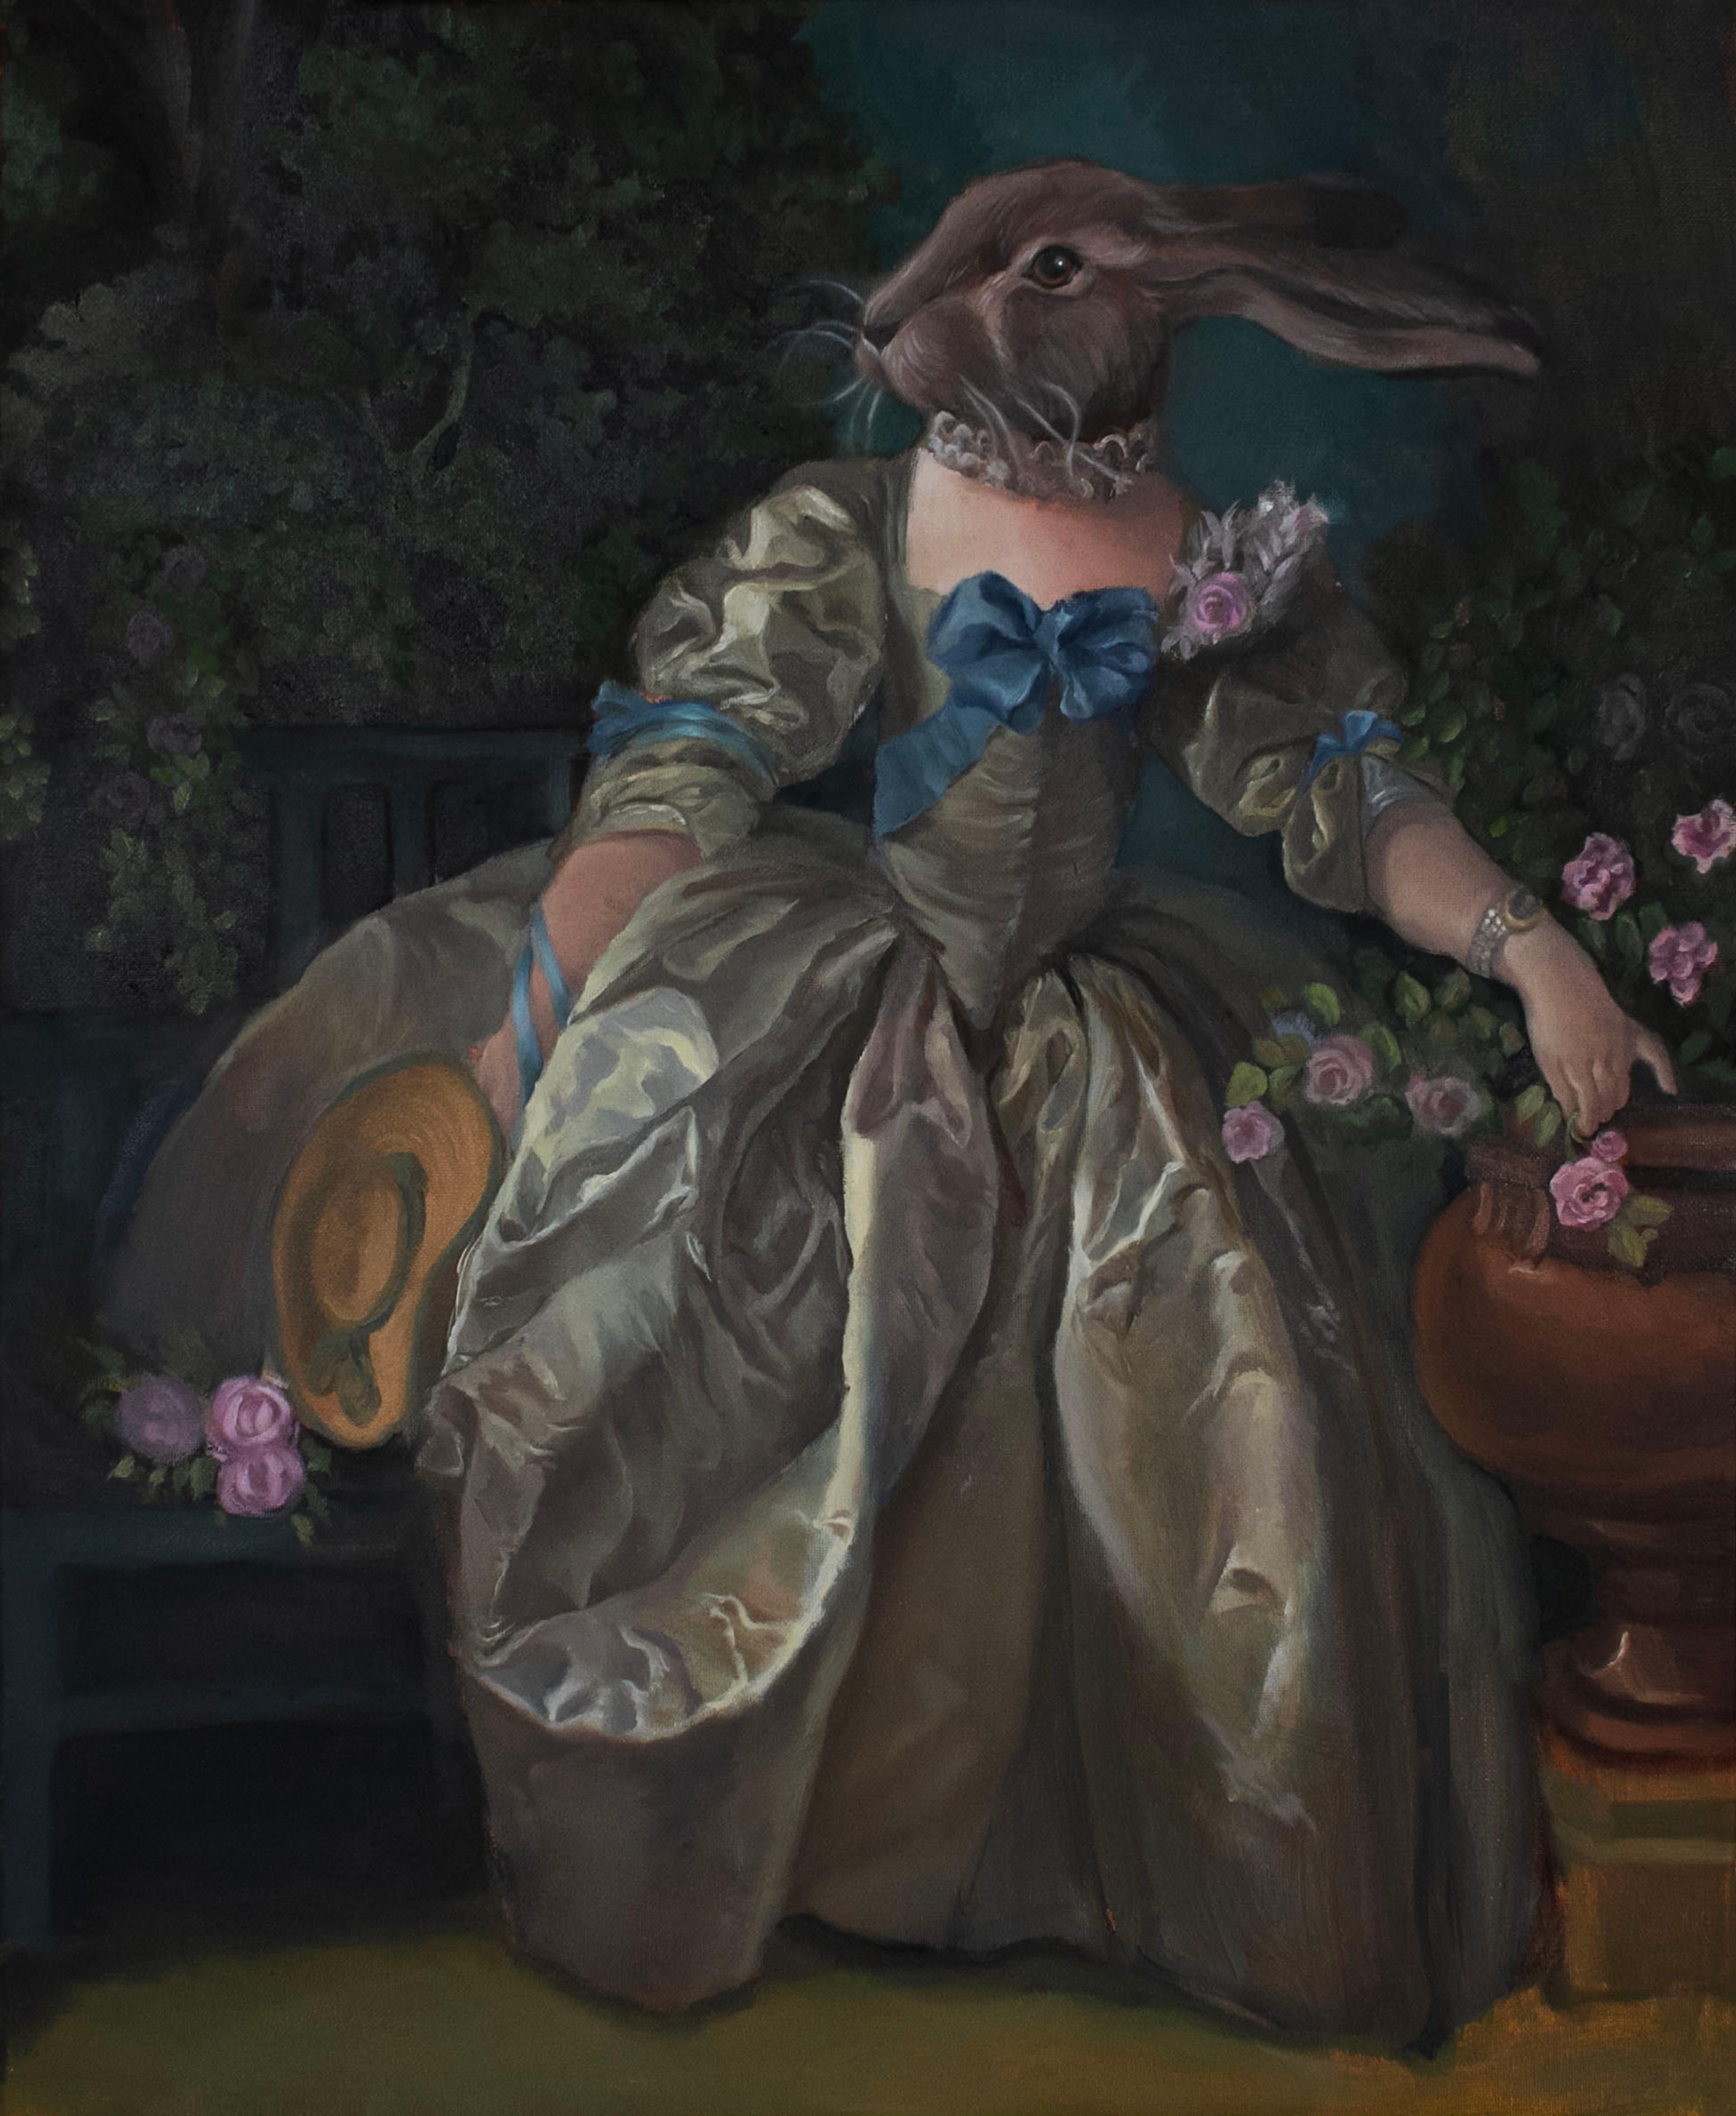 Oil painting of a child-sized human figure standing in a garden, wearing a billowing gray satin dress from the eighteenth century, next to a brown vase on the right filled with pink flowers. The figure wears a frilly neck collar. Above the collar, the figure has the face, head, and long ears of a brown hare and faces to the left. The figure wears a tied blue bow at the top of its dress, and holds a light brown brimmed hat low in its right hand, off to the side. The figure's left hand rests above the flowered vase to the right. The left and right sleeves of the dress are decorated with tied blue bows, and a wall of green bushes rises in the background behind a dark blue railing.